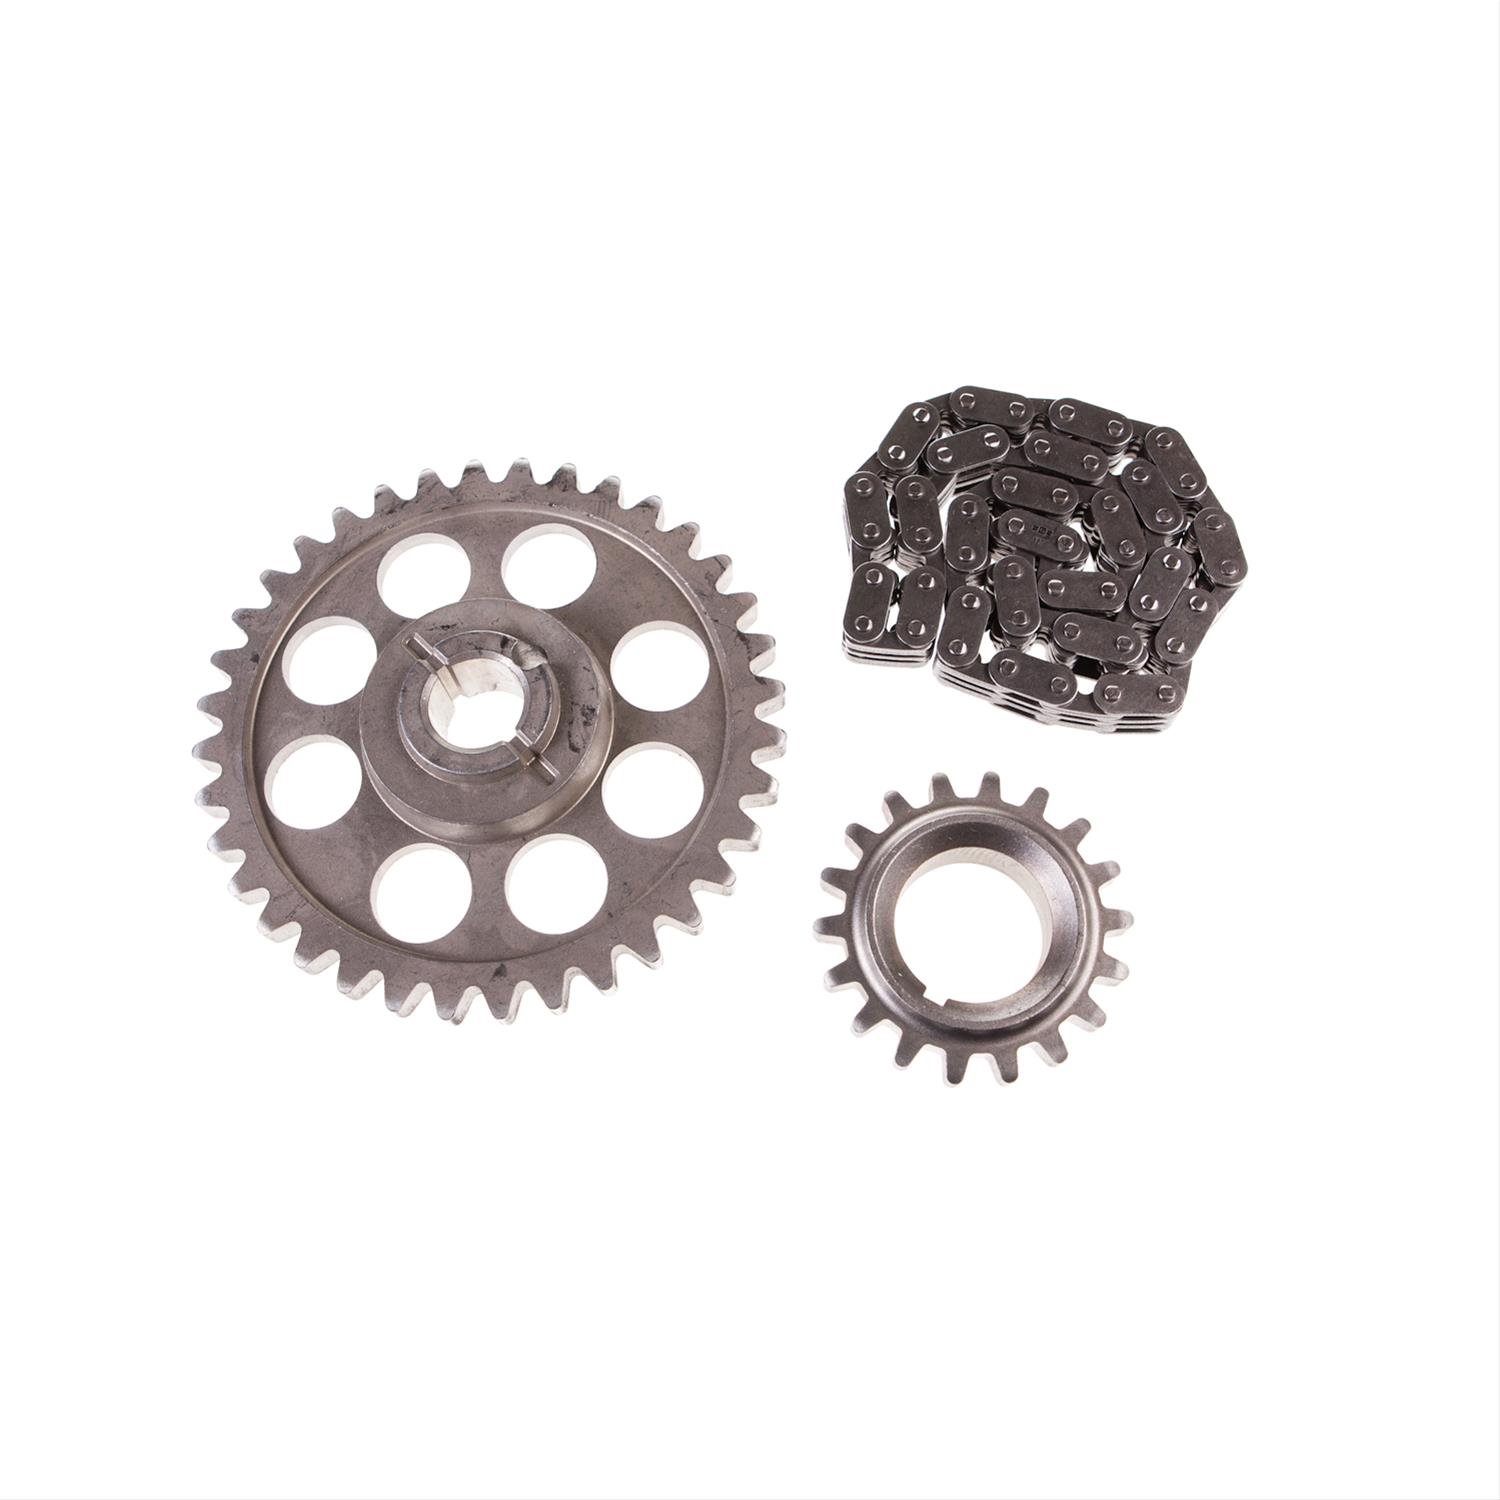 CHAIN-TIMING SET (3)